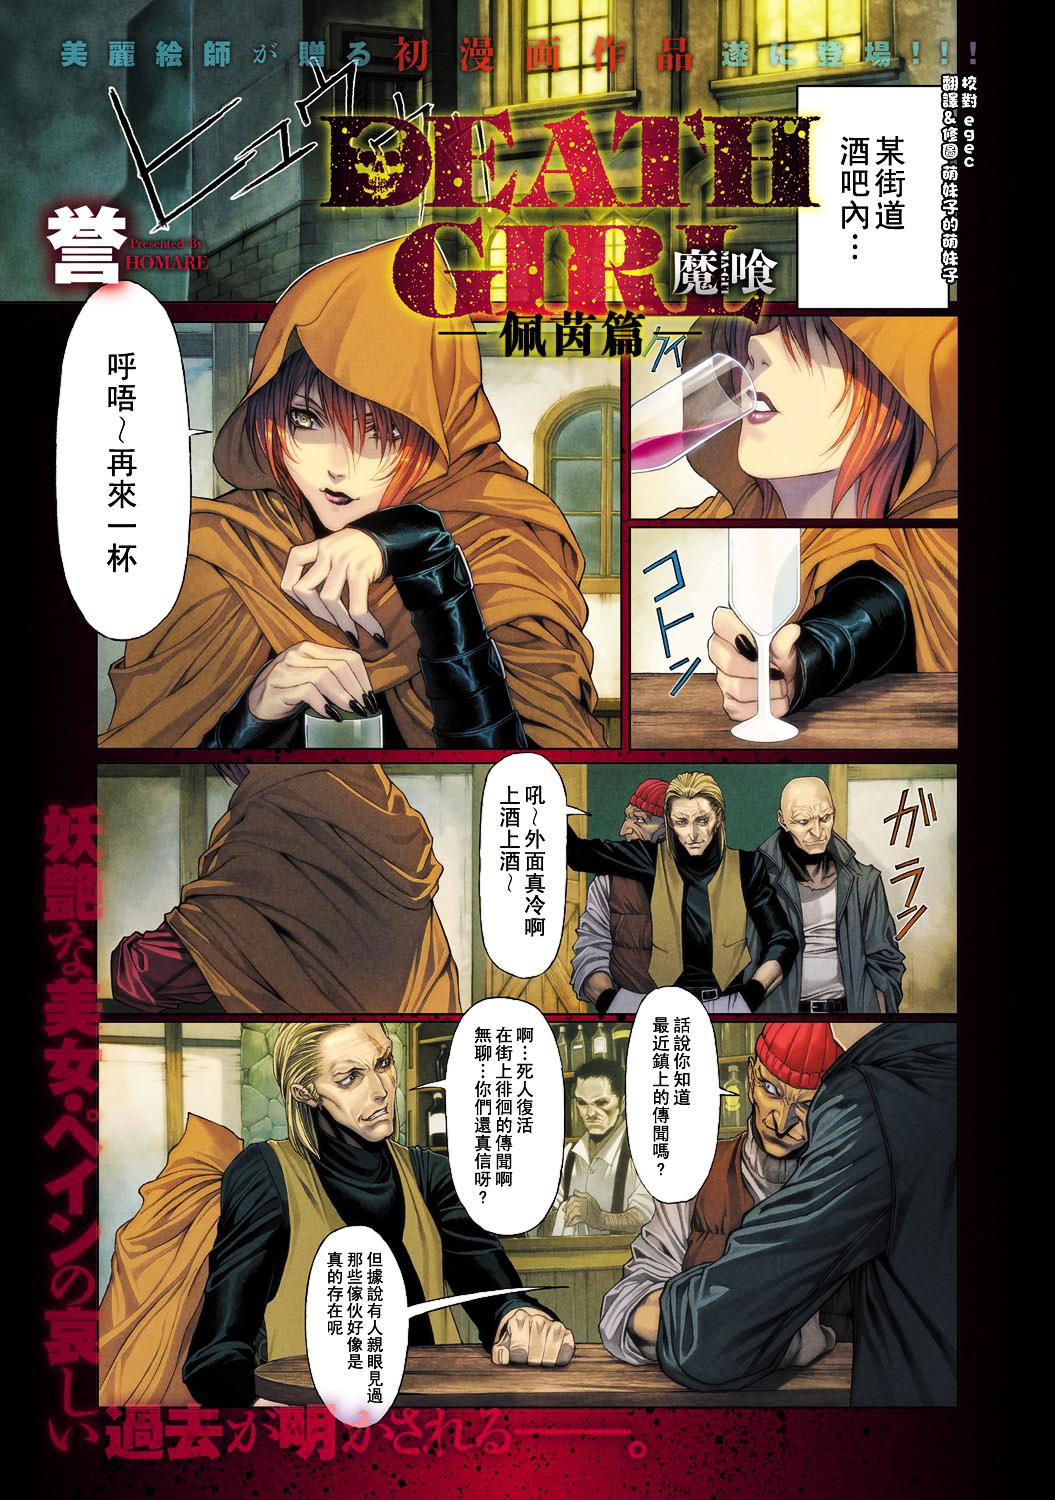 Sex [Homare] Ma-Gui -DEATH GIRL- Pain Hen (COMIC Anthurium 015 2014-07) [Chinese] [里界漢化組] [Digital] Erotica - Page 1